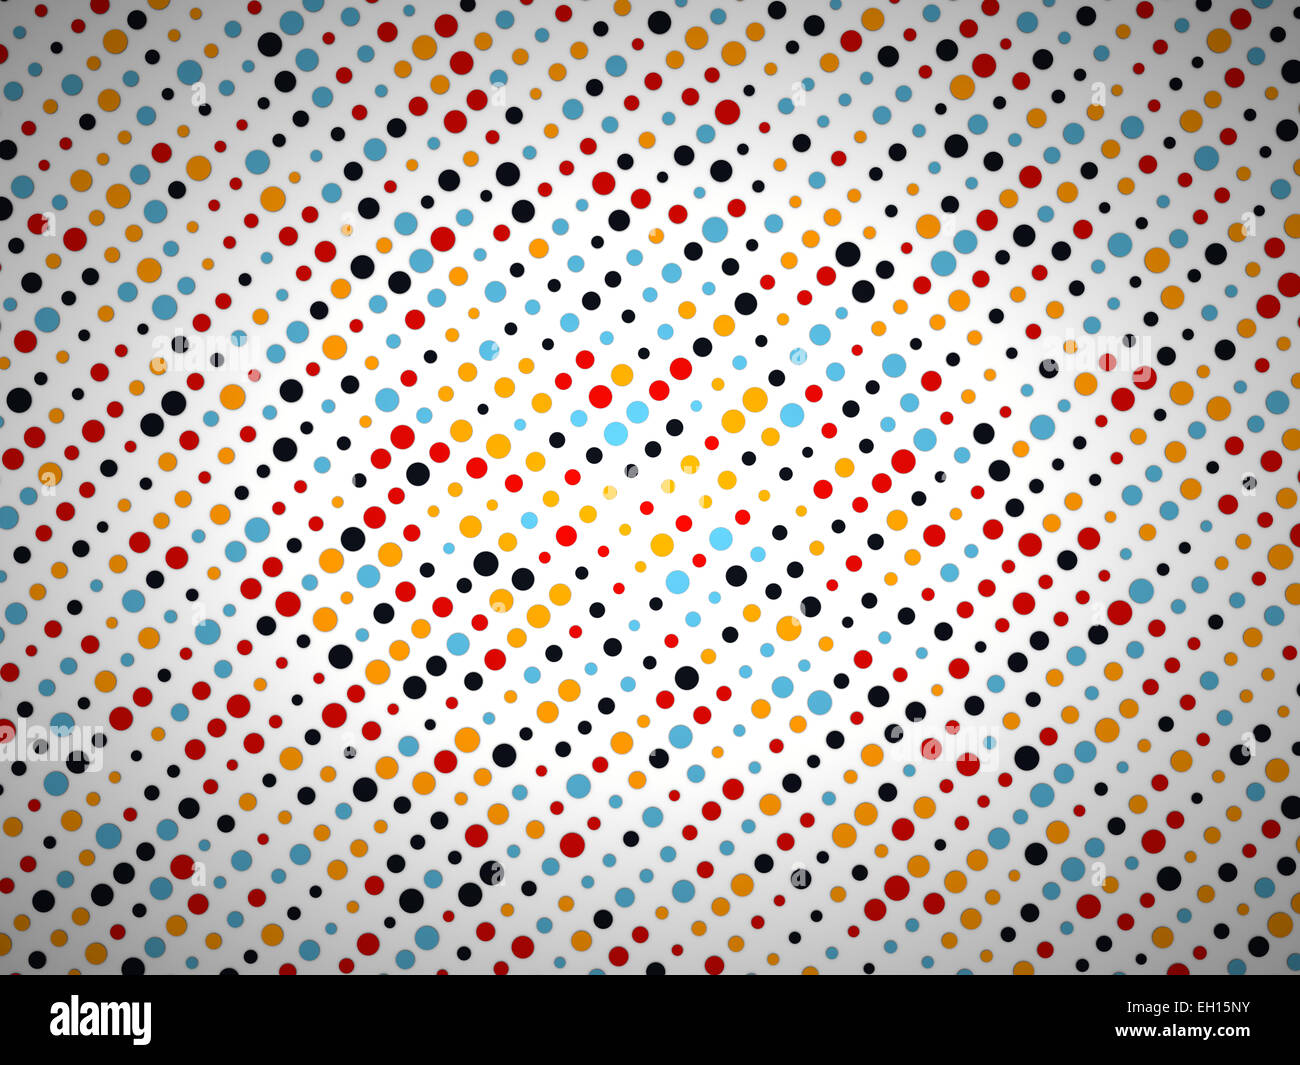 Polka dot pattern with black yellow blue and red circles. Large size Stock Photo